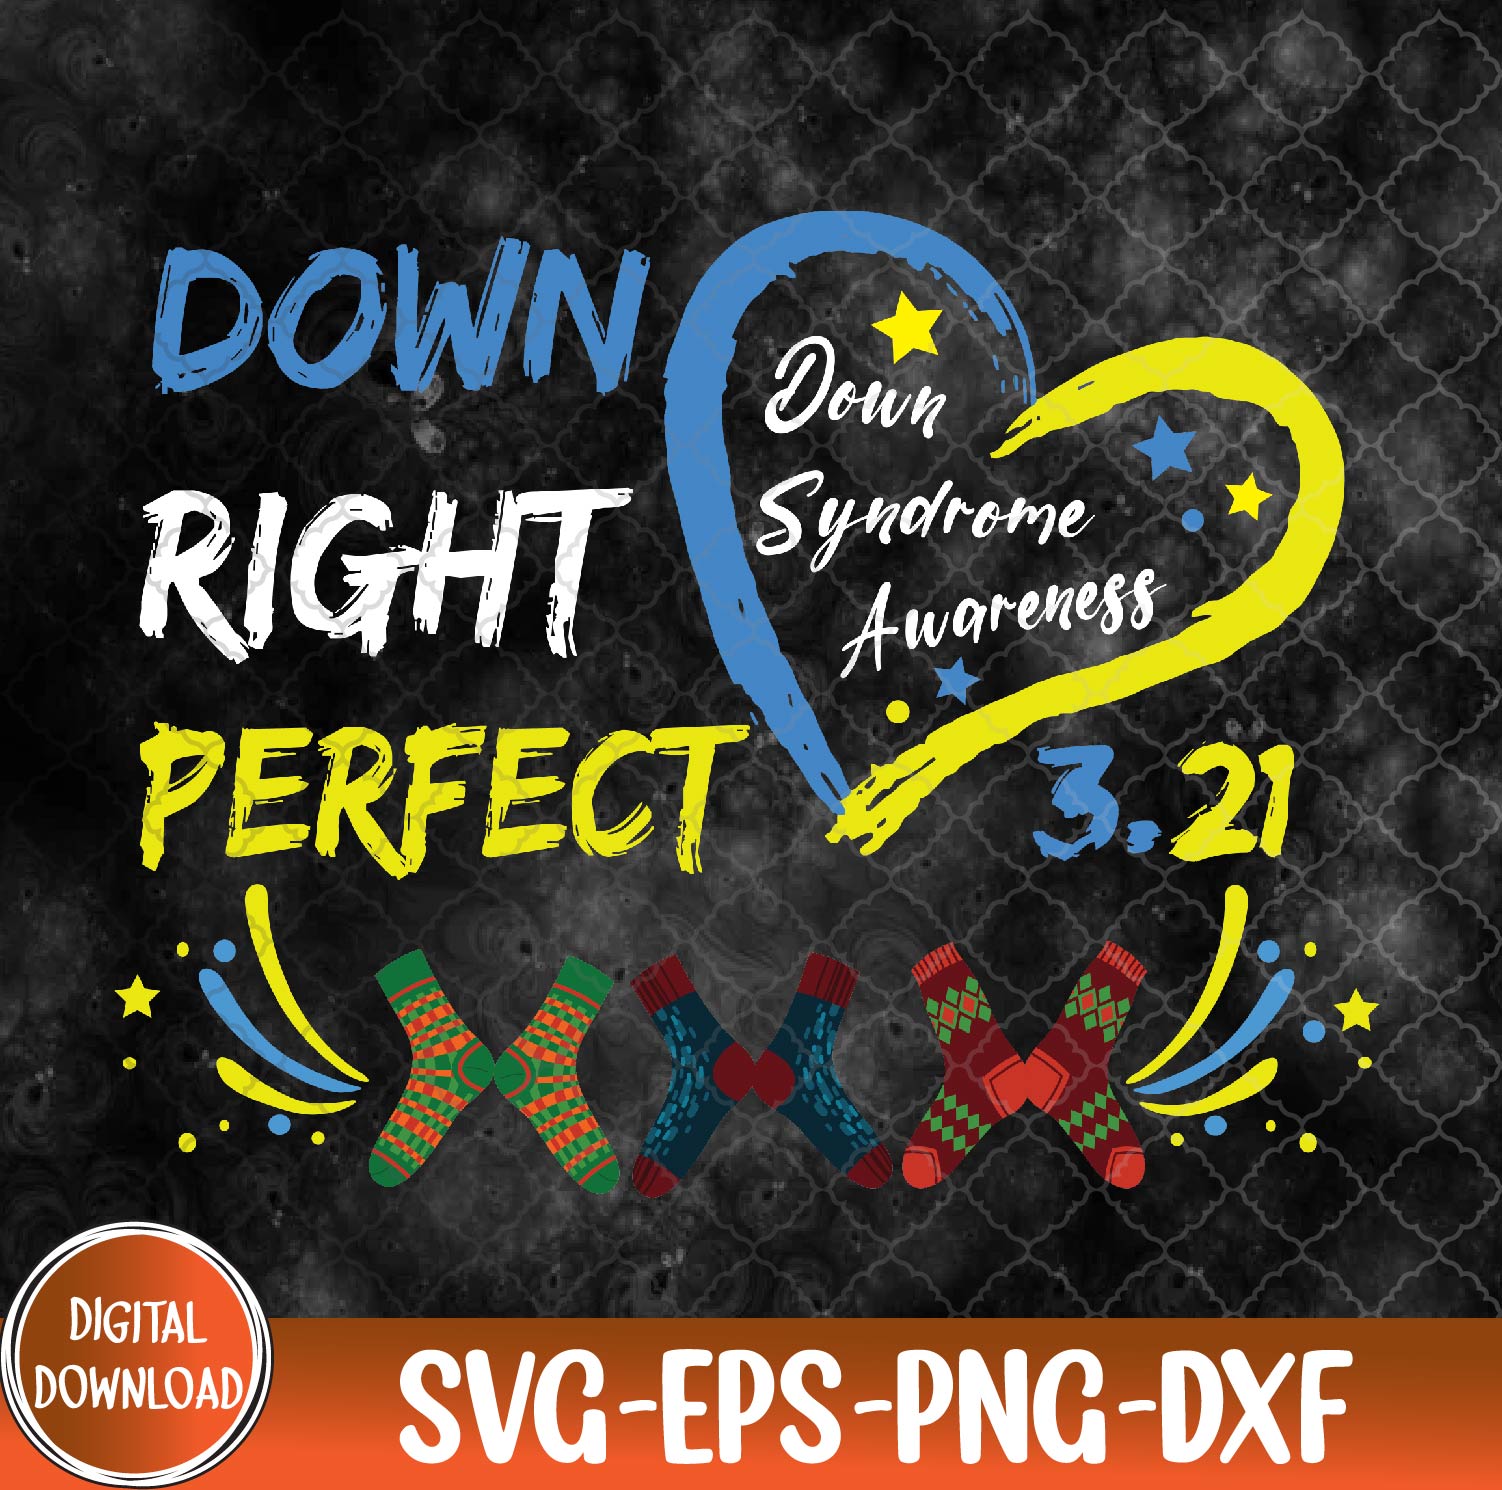 WTMNEW9file 09 30 Down Syndrome Awareness 321 Down Right Perfect Socks Svg, Eps, Png, Dxf